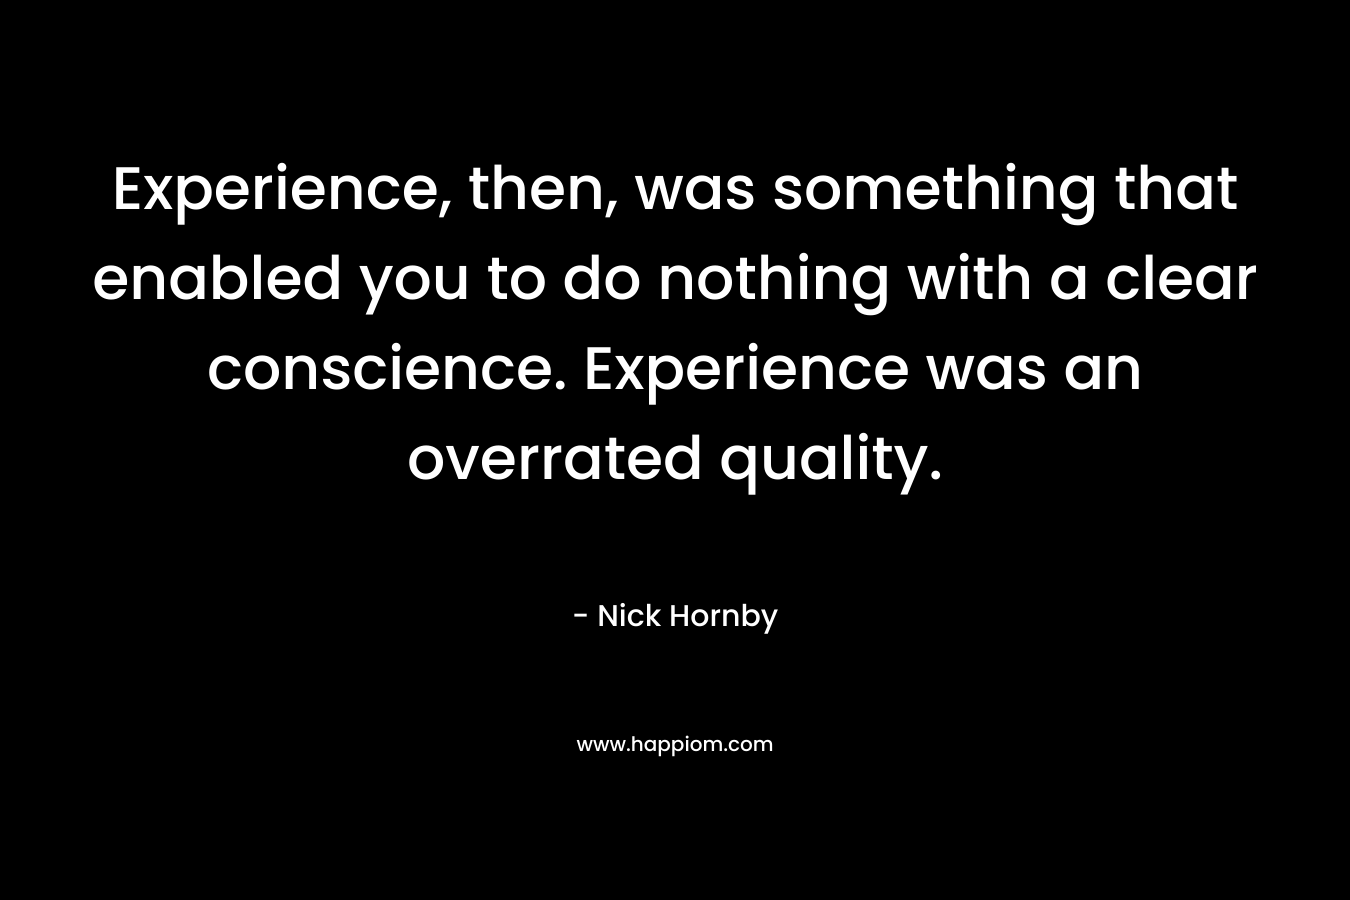 Experience, then, was something that enabled you to do nothing with a clear conscience. Experience was an overrated quality.